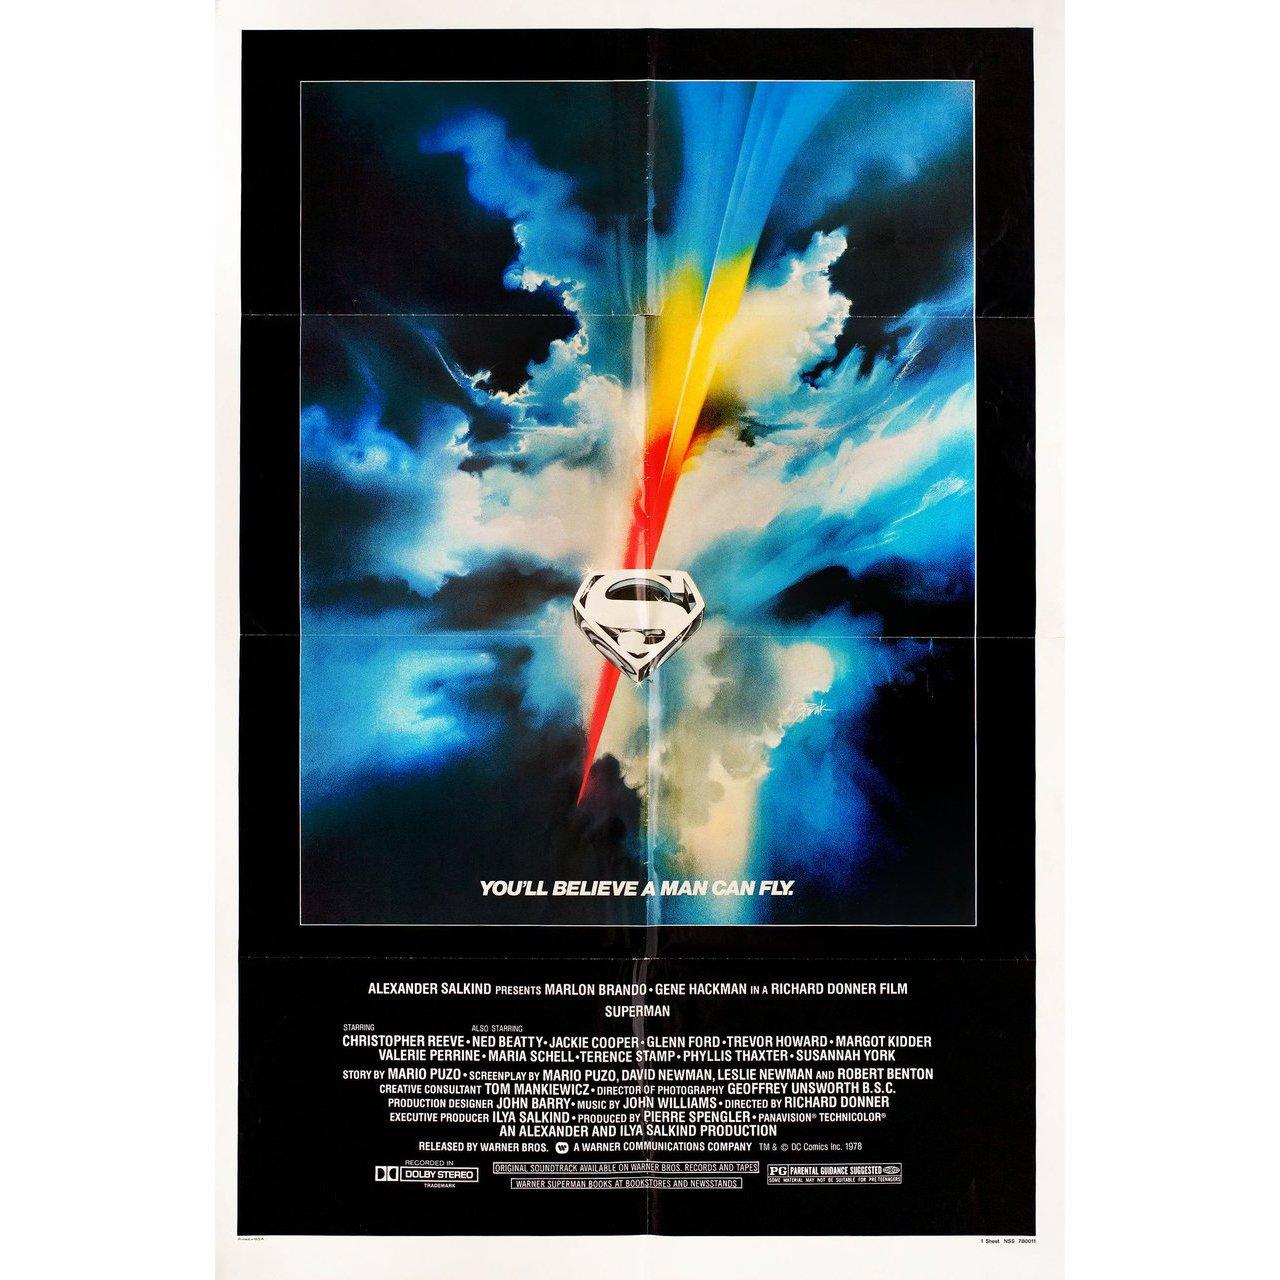 Original 1978 U.S. one sheet poster by Bob Peak for the film Superman directed by Richard Donner with Marlon Brando / Gene Hackman / Christopher Reeve / Ned Beatty. Very good-fine condition, folded. Many original posters were issued folded or were